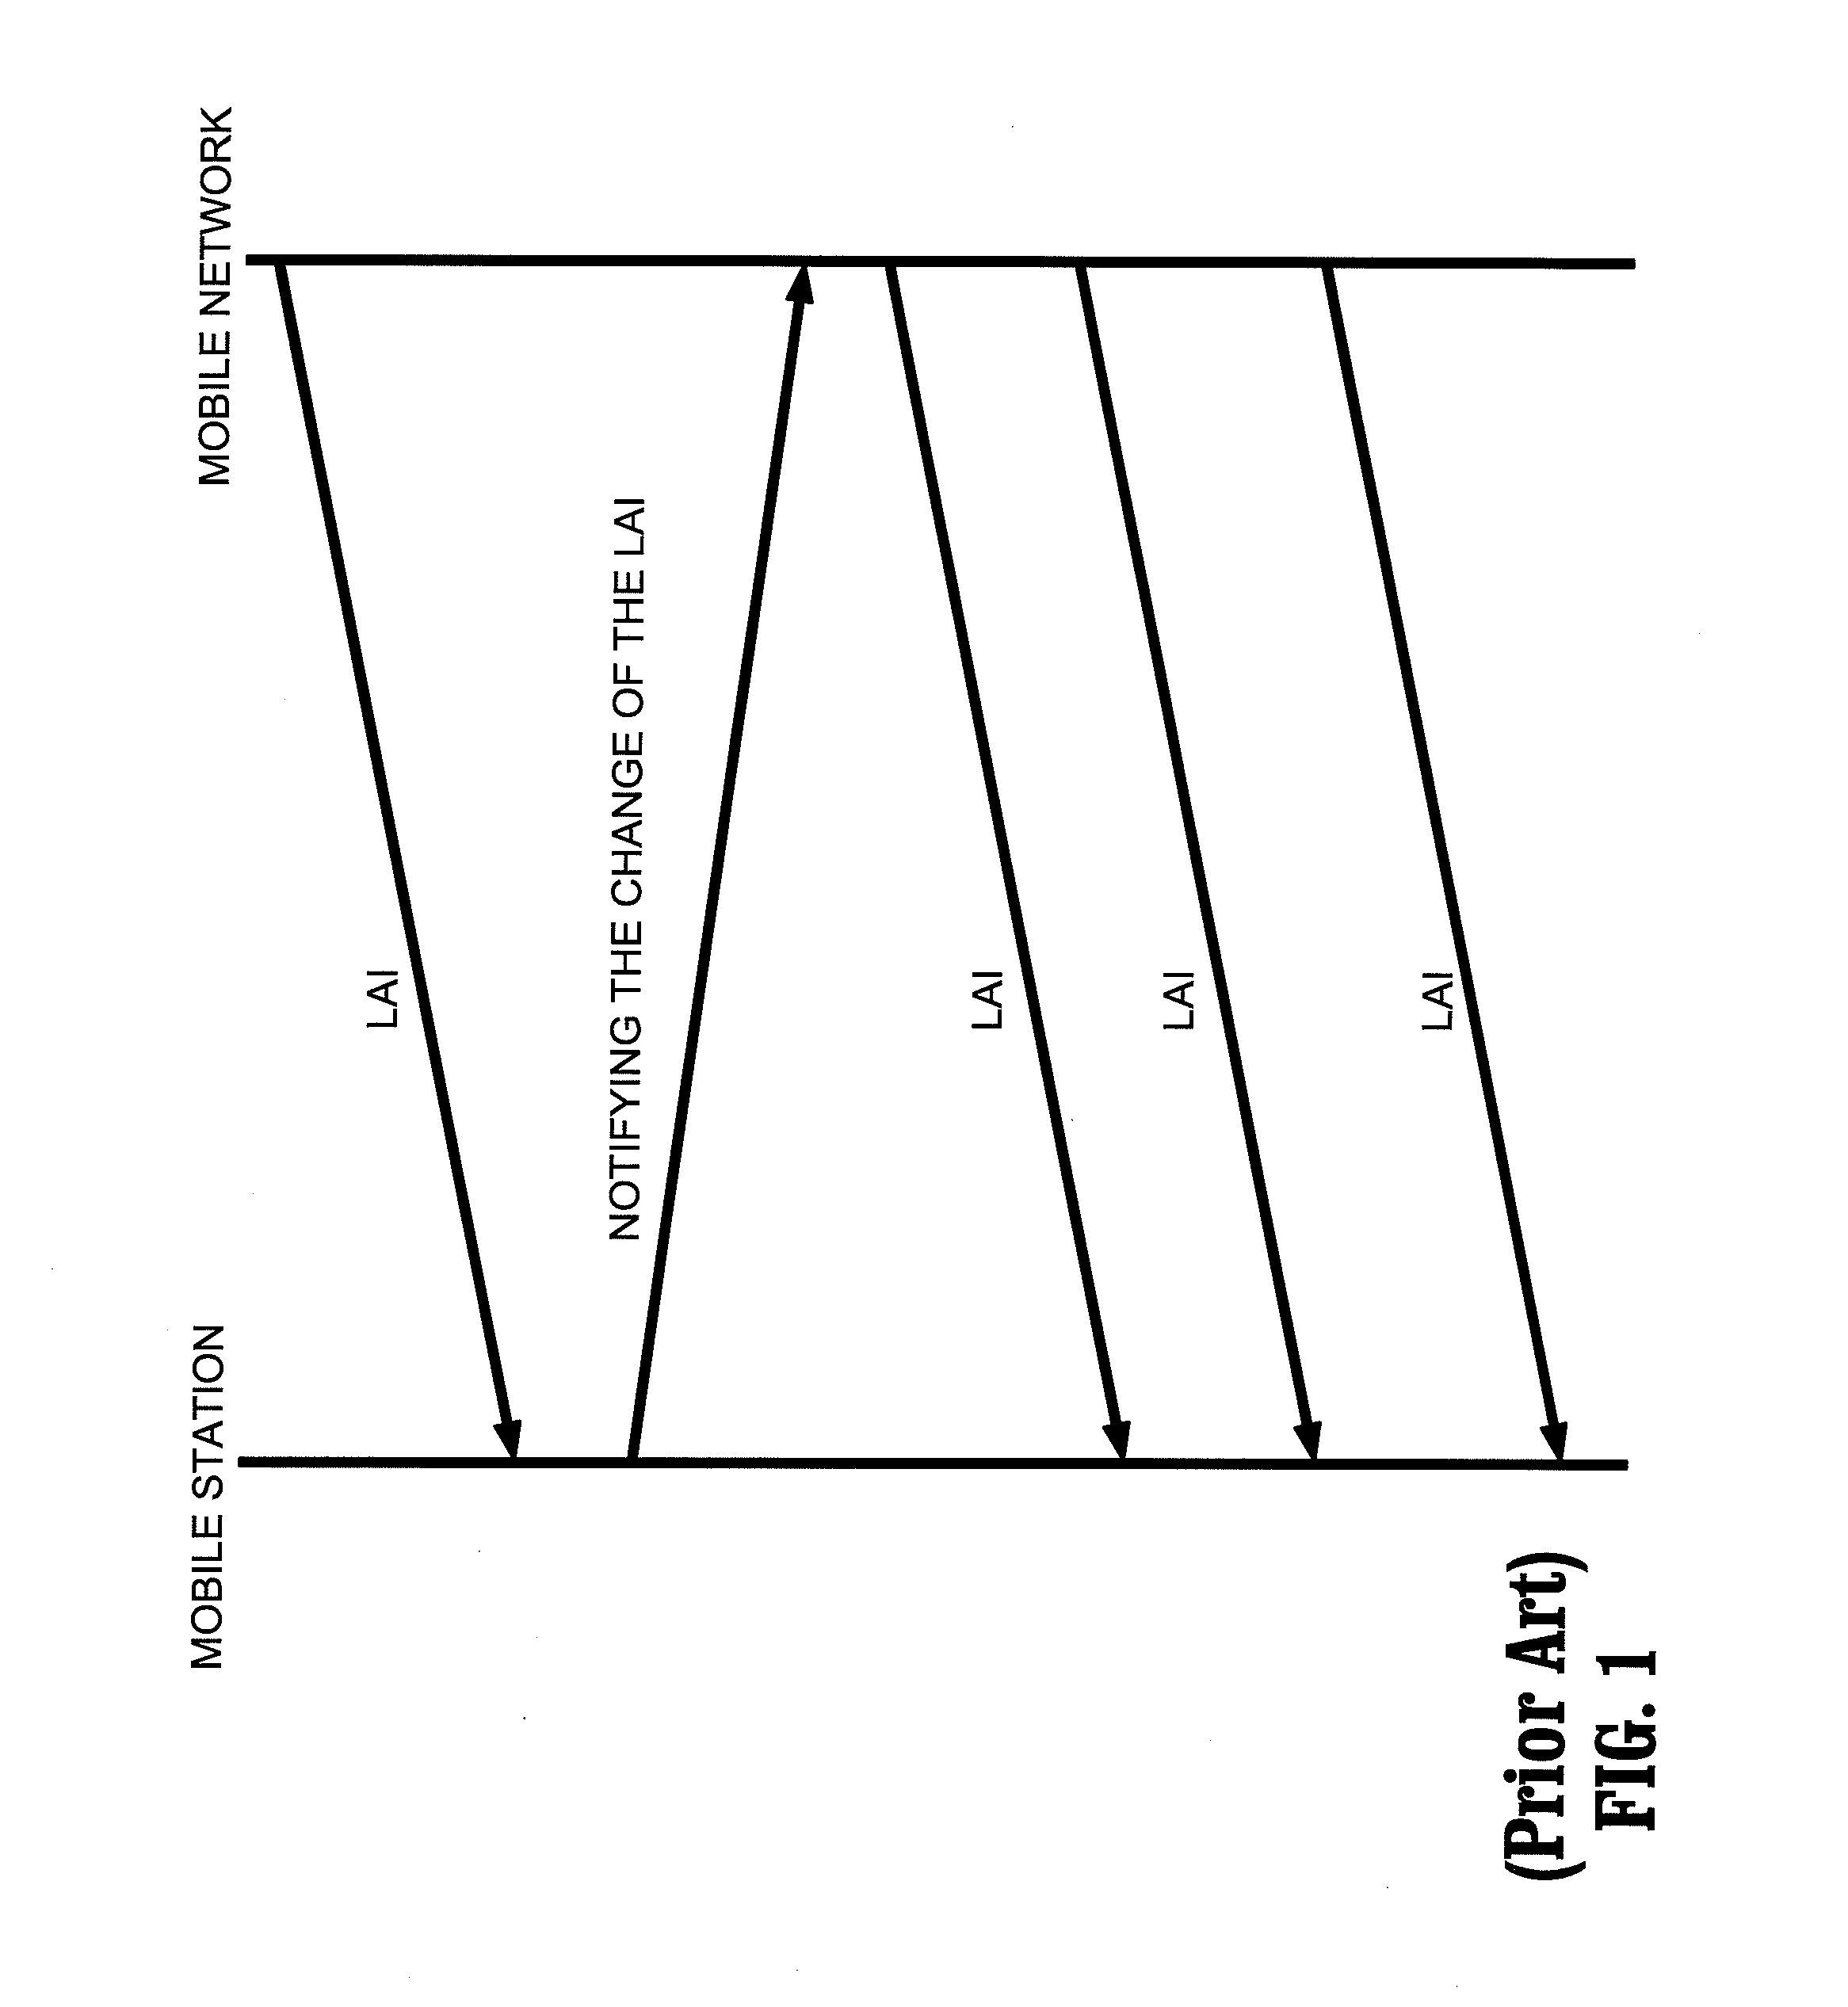 System and method of making location updating management on a mobile station, mobile station and mobile network